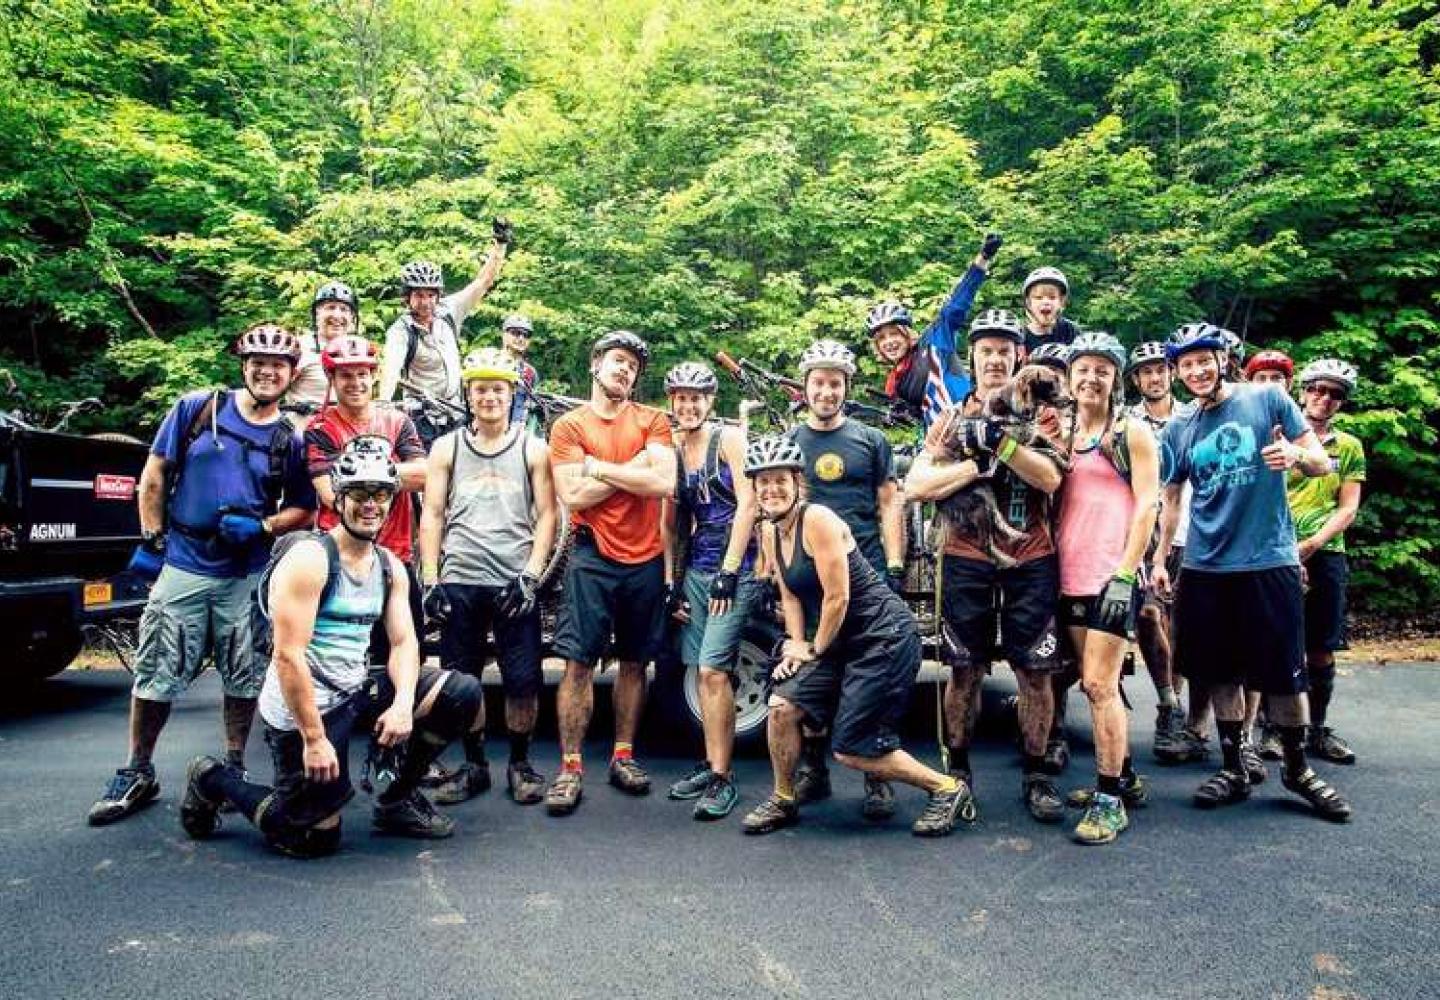 Wilmington Mountain Bike Festival is a must make event.